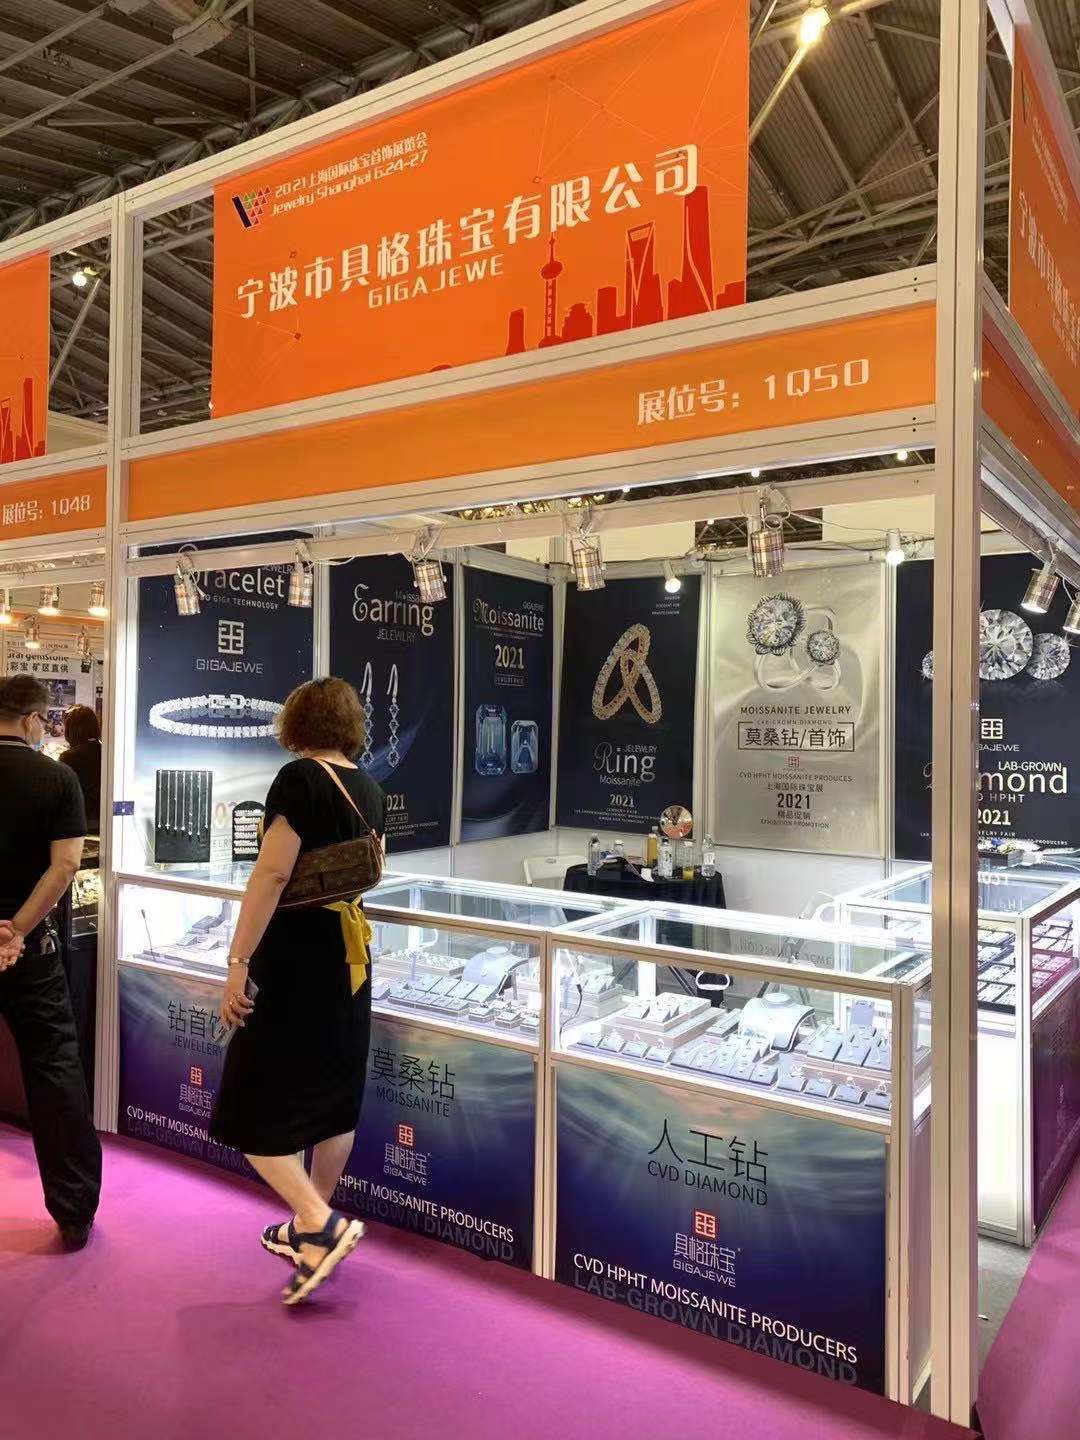 In summer, Gigajewe debuted at the World Expo Exhibition and Convention Center!